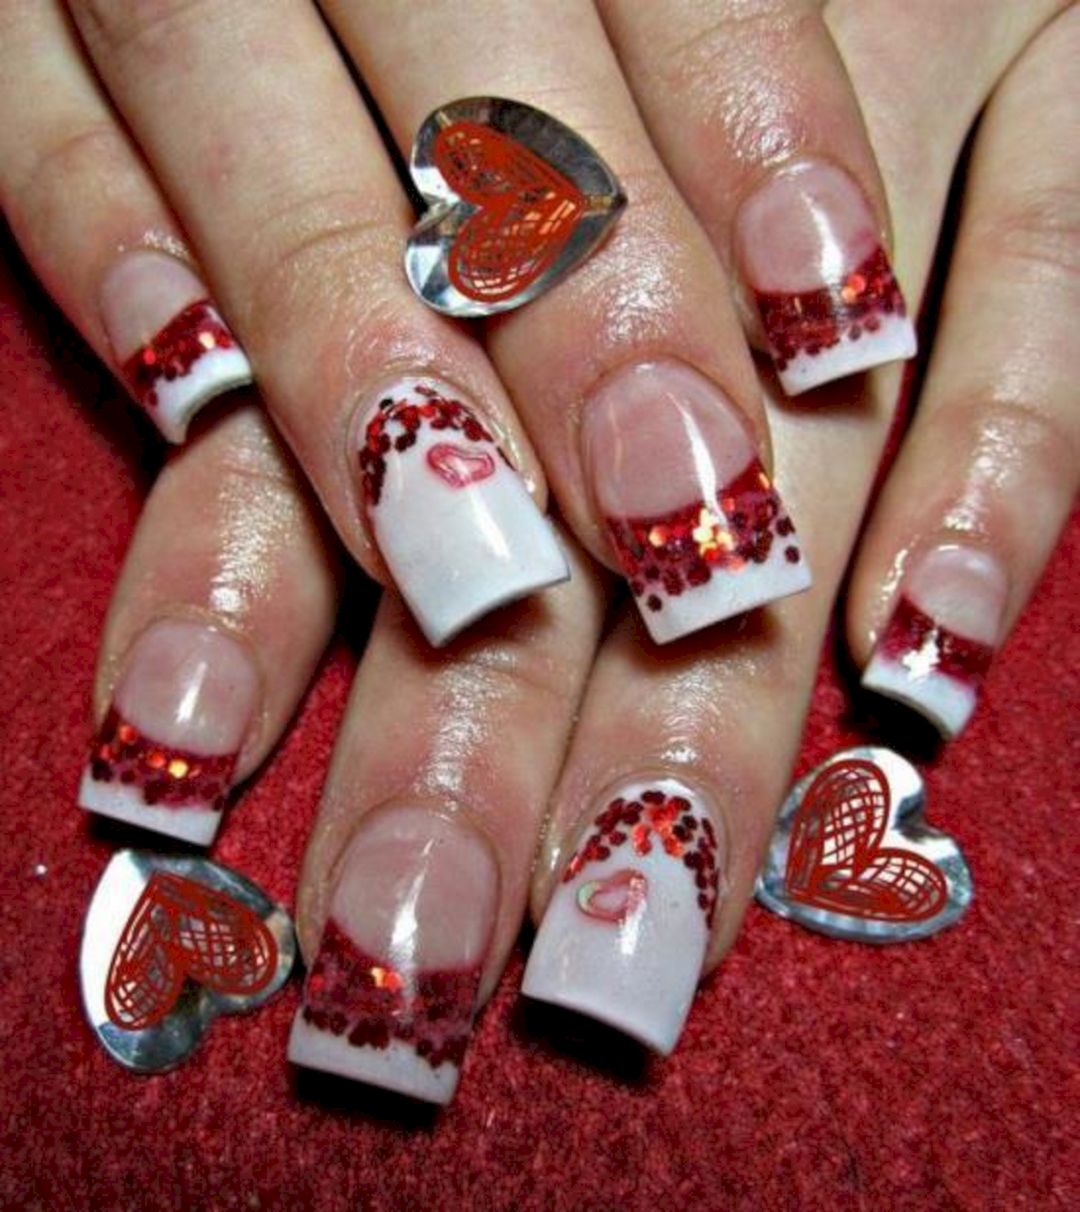 Love is in the air from naildesigncode